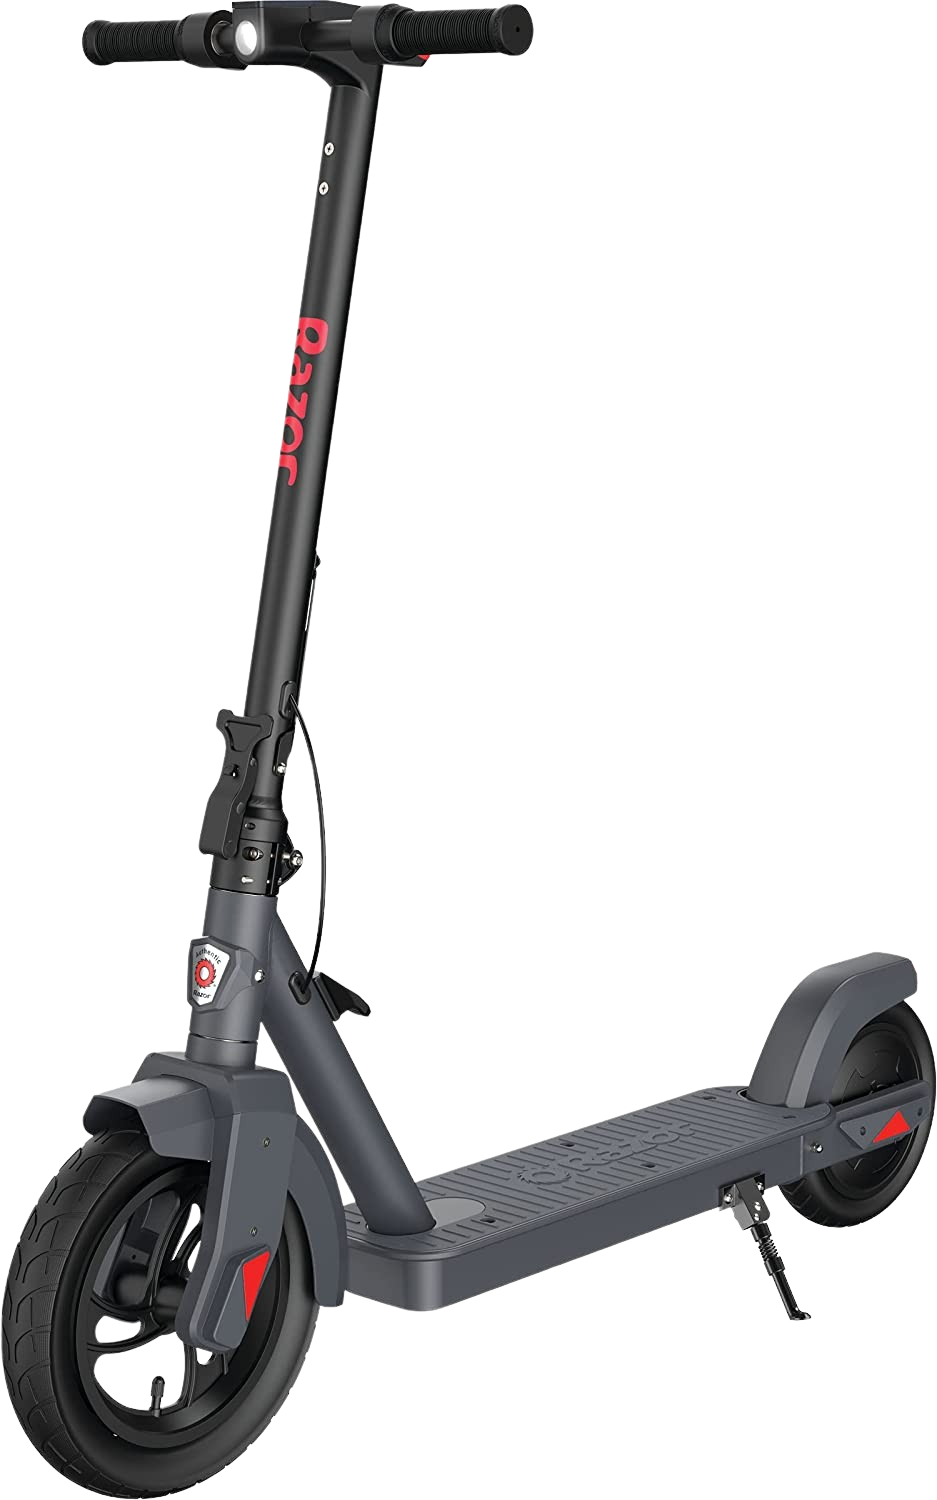 Razor, Razor C25 Commuter Folding Design Up to 18 mph and 18-mile range Electric Scooter New